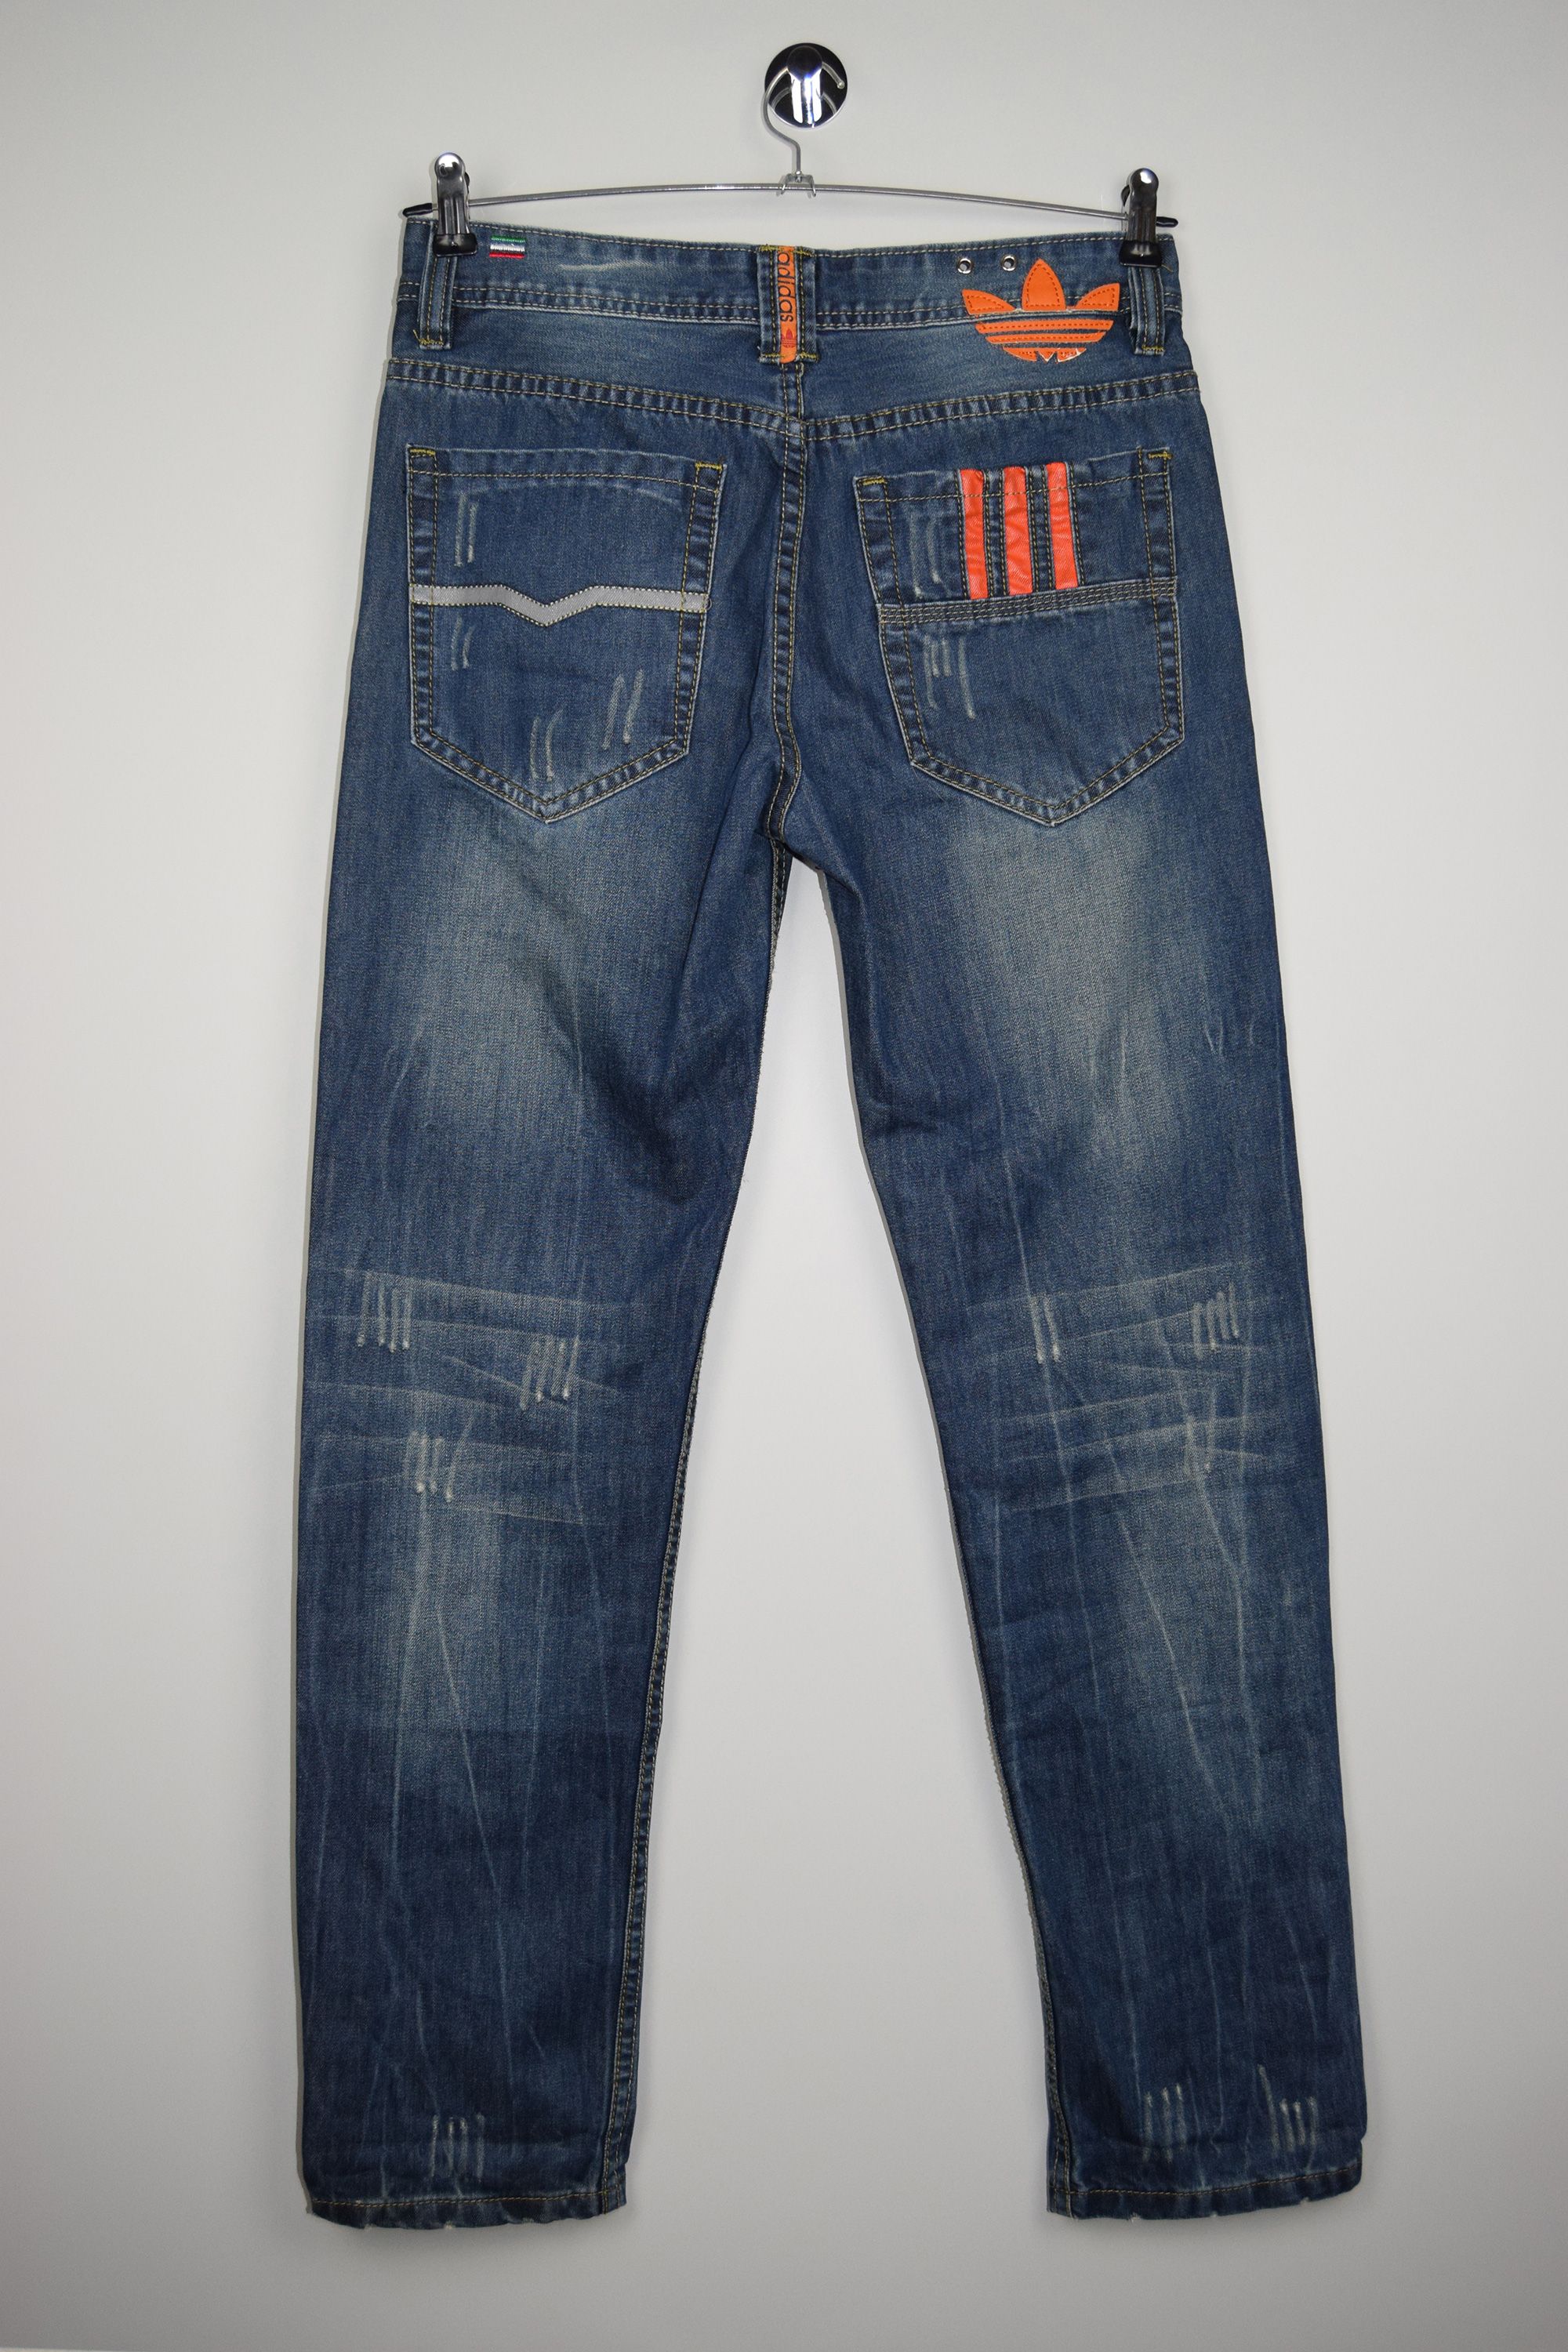 Adidas Diesel and Adidas Kurren Blue Denim Raw Selvedged Jeans Size US 31 - 1 Preview